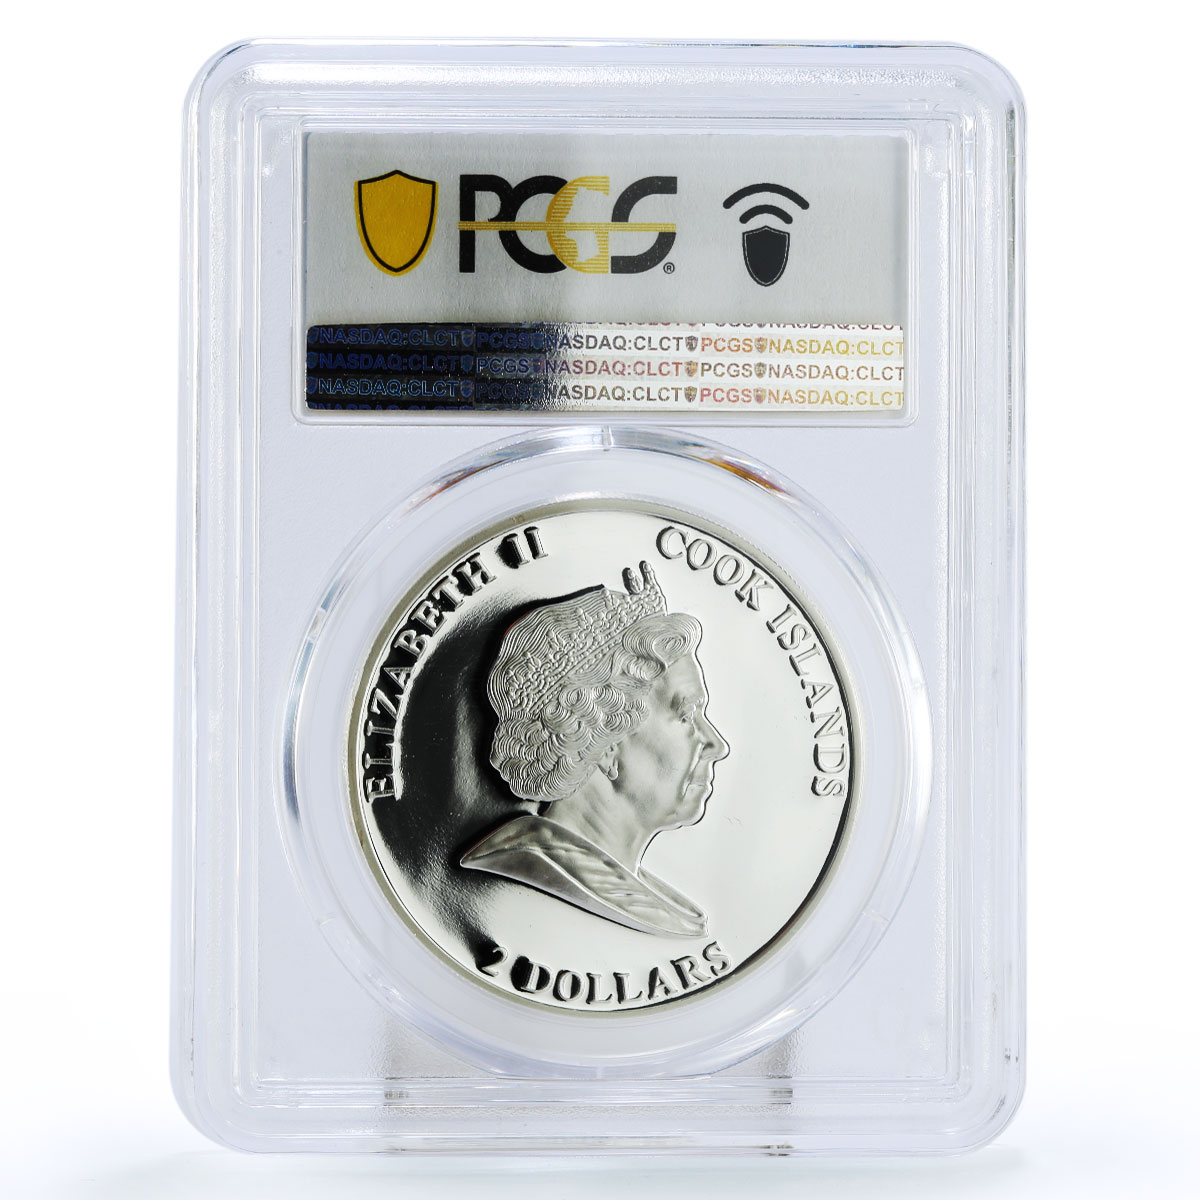 Cook Island 2 dollars Year of Rabbit Two Gray Rabbits PR69 PCGS silver coin 2011